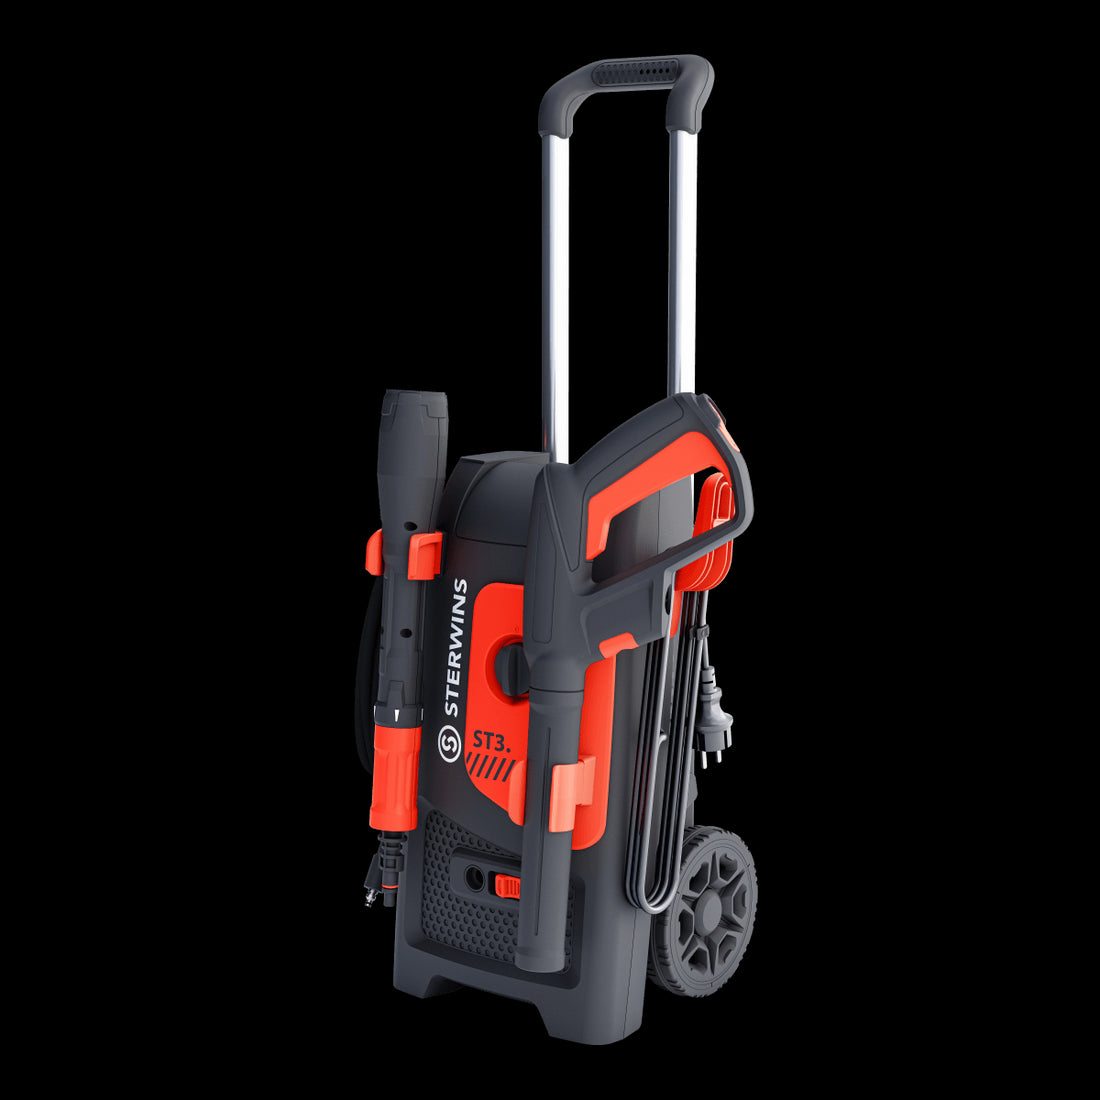 STERWINS ST3 HIGH-PRESSURE WASHER MAX. PRESSURE 150 BAR WITH 5-IN-1 LARGE NOZZLE GUN